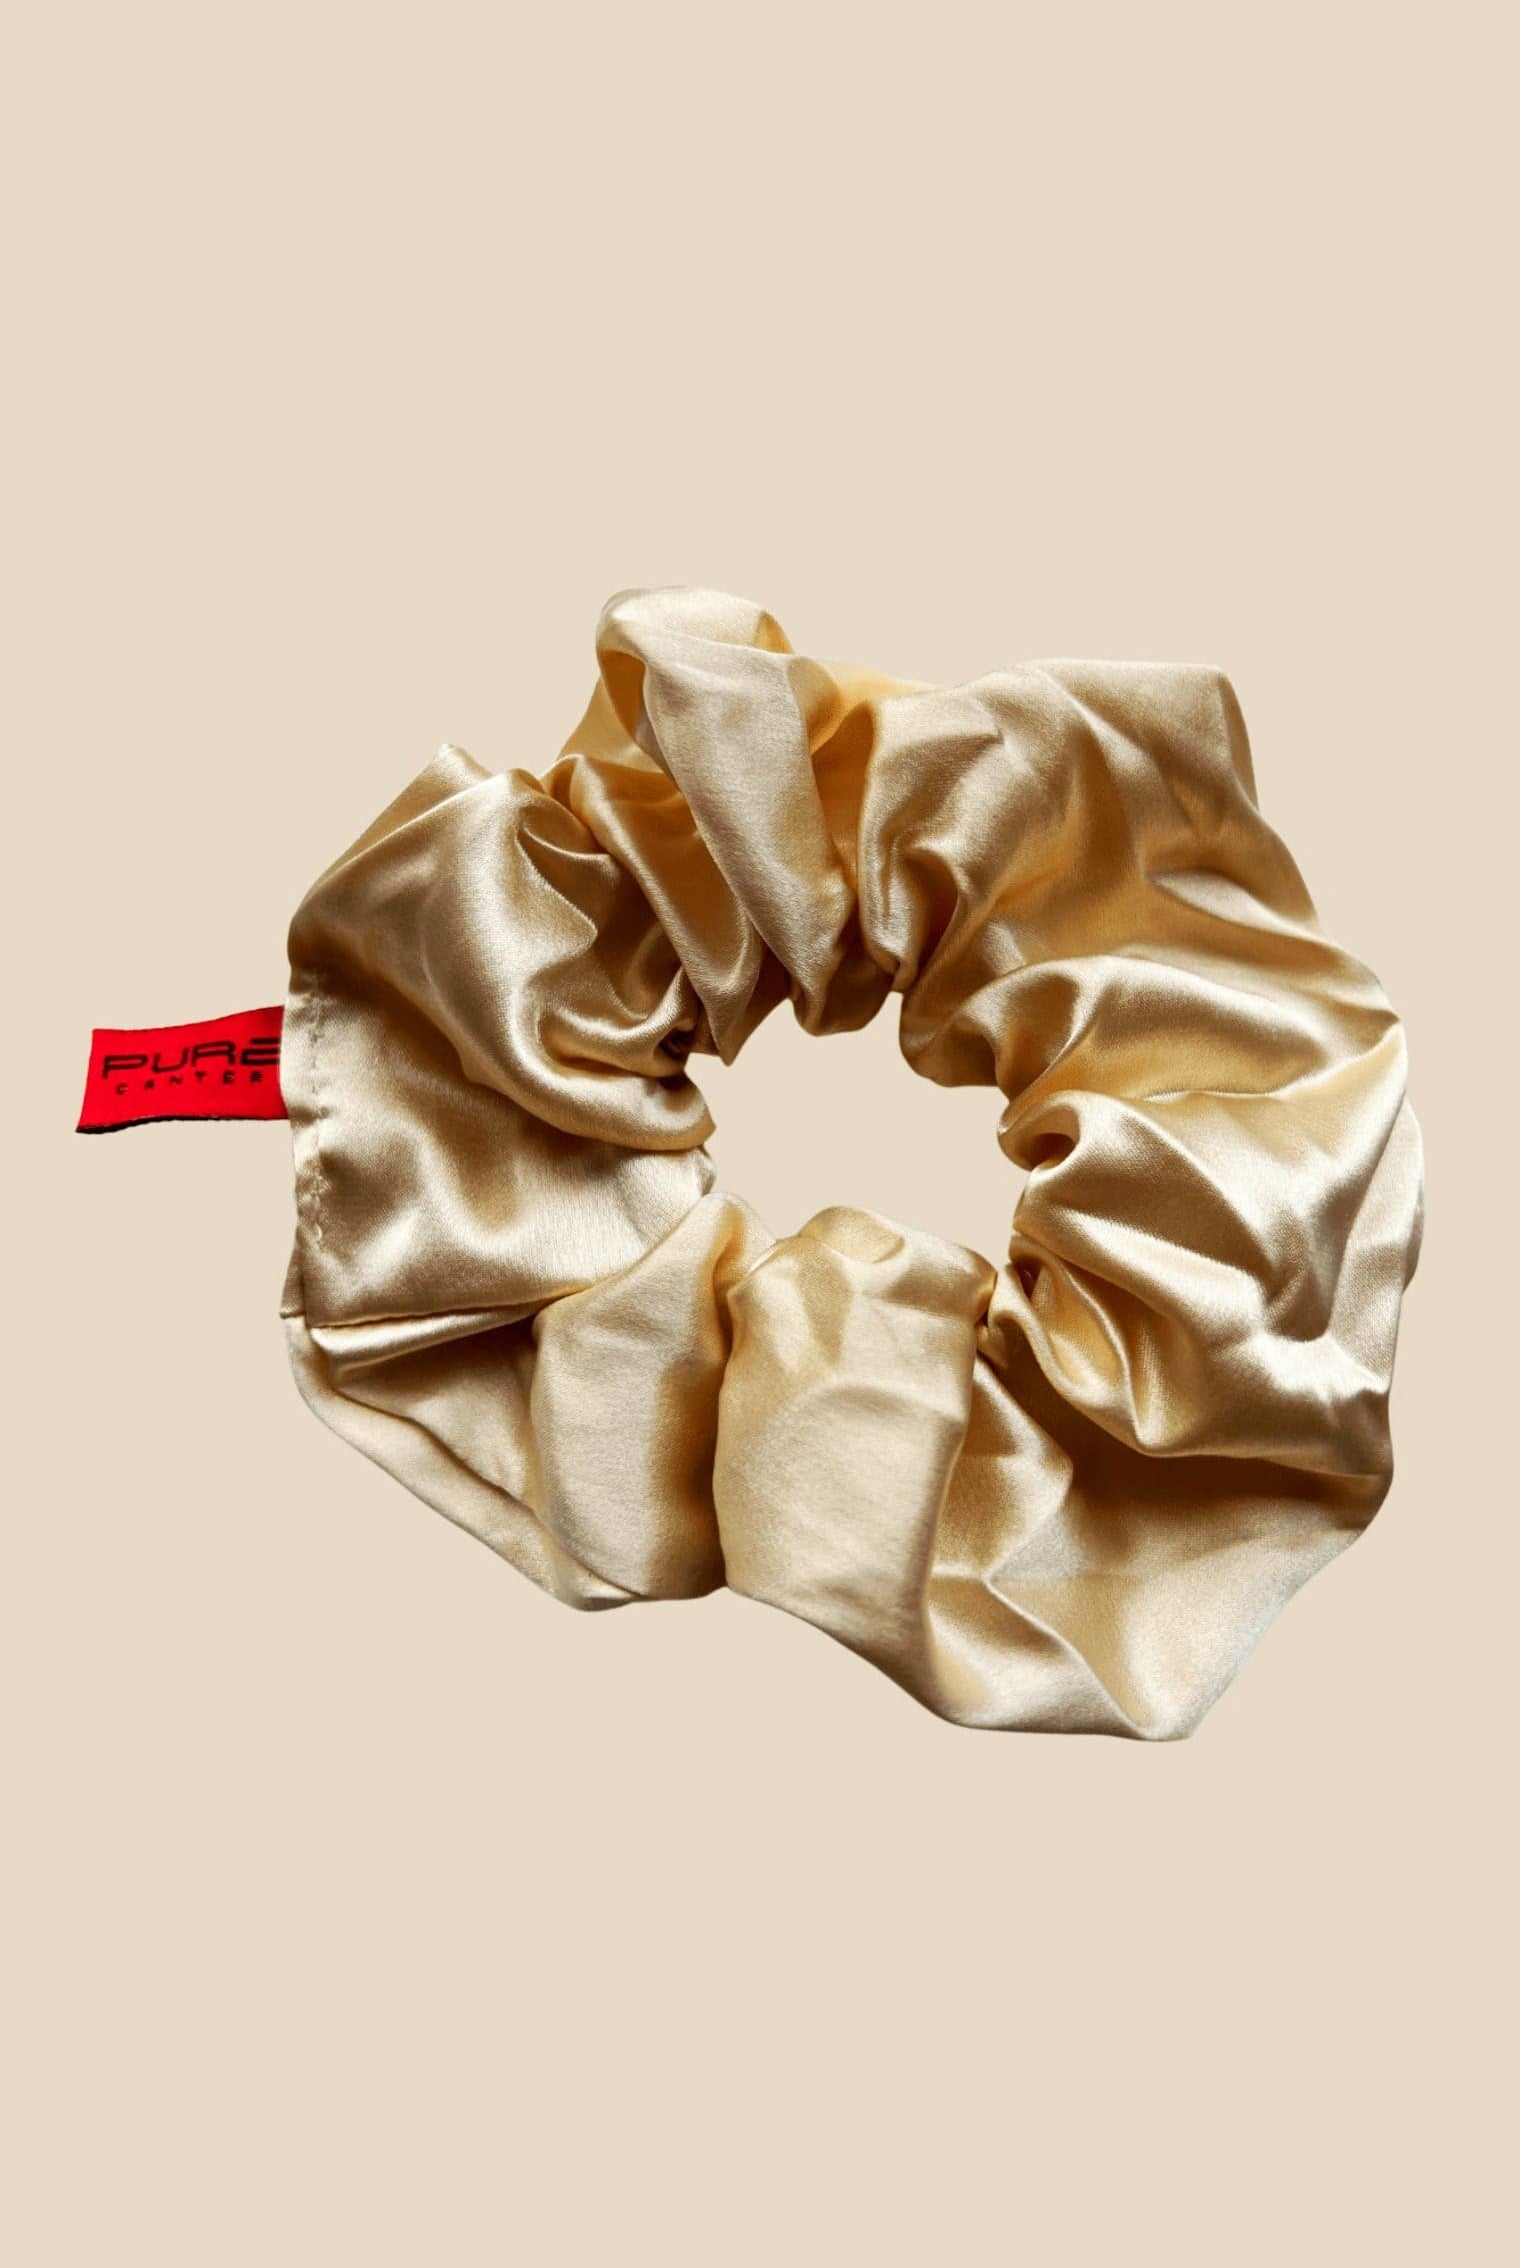 An Oversized Scrunchie by Pure Canter Pty Ltd in beige satin with a slightly glossy finish is displayed against a solid light brown background. It has a red tag with black text attached to one side, making it perfect for casual outings.